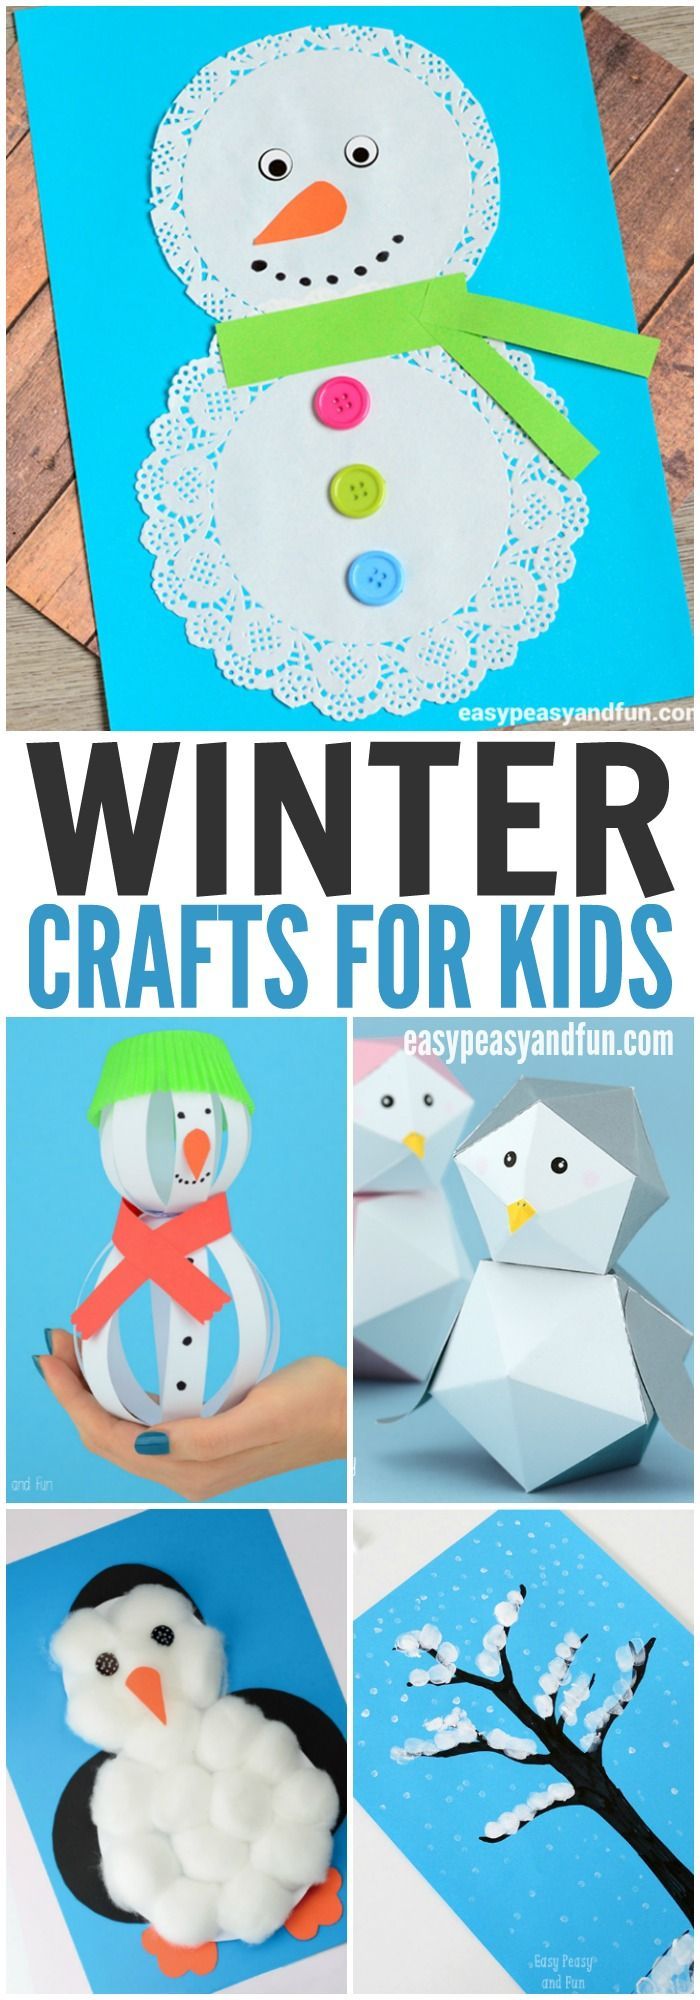 Adorable Winter Crafts for Kids